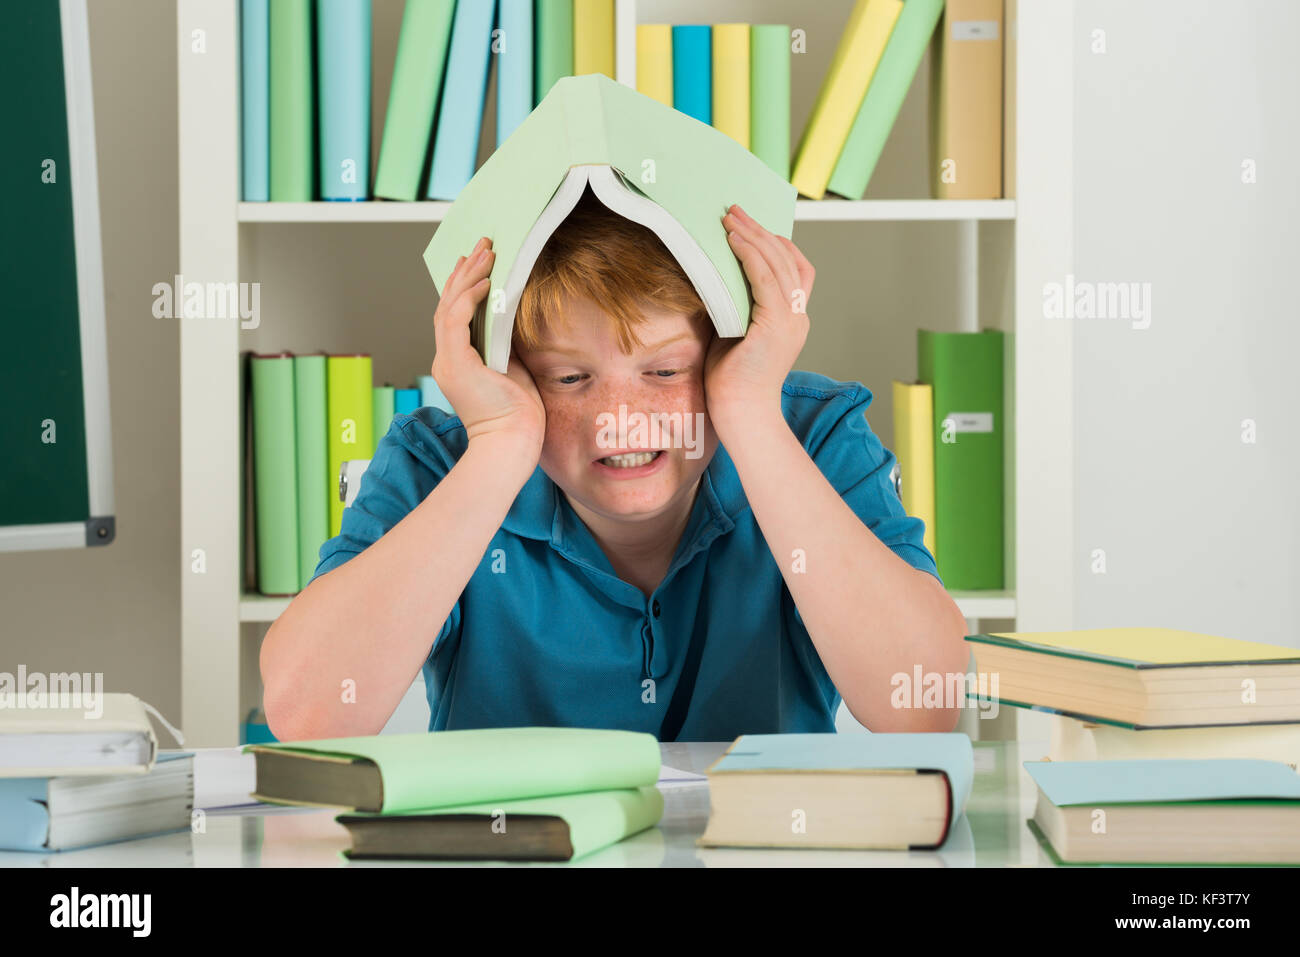 Angry Boy Sitting in Library Holding livre sur sa tête Banque D'Images